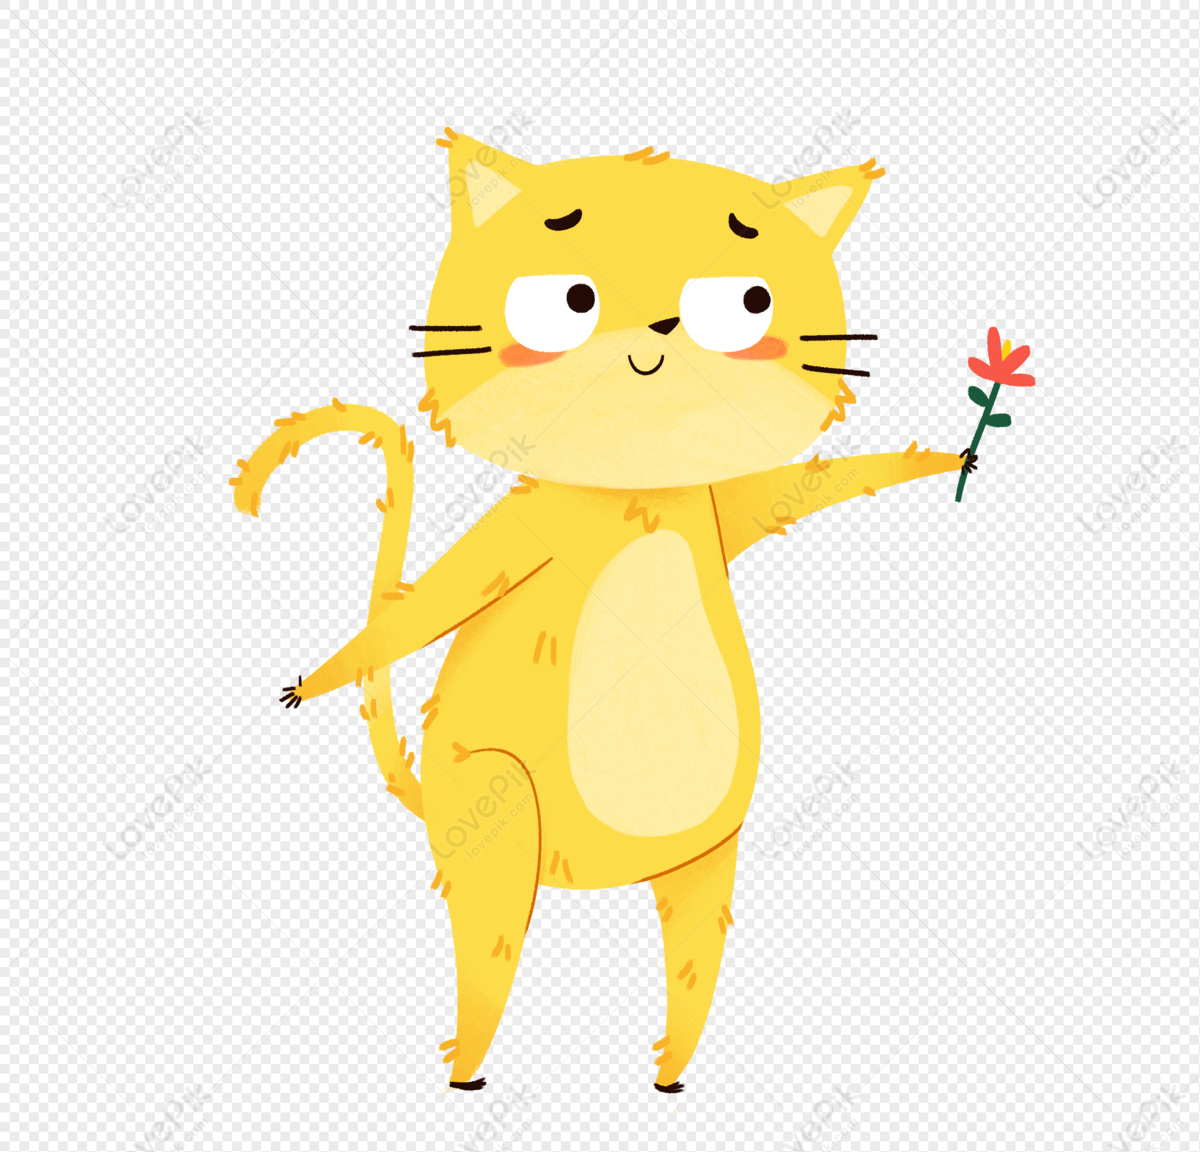 Animal Cute Orange Cat Giving Flowers PNG Image Free Download And ...